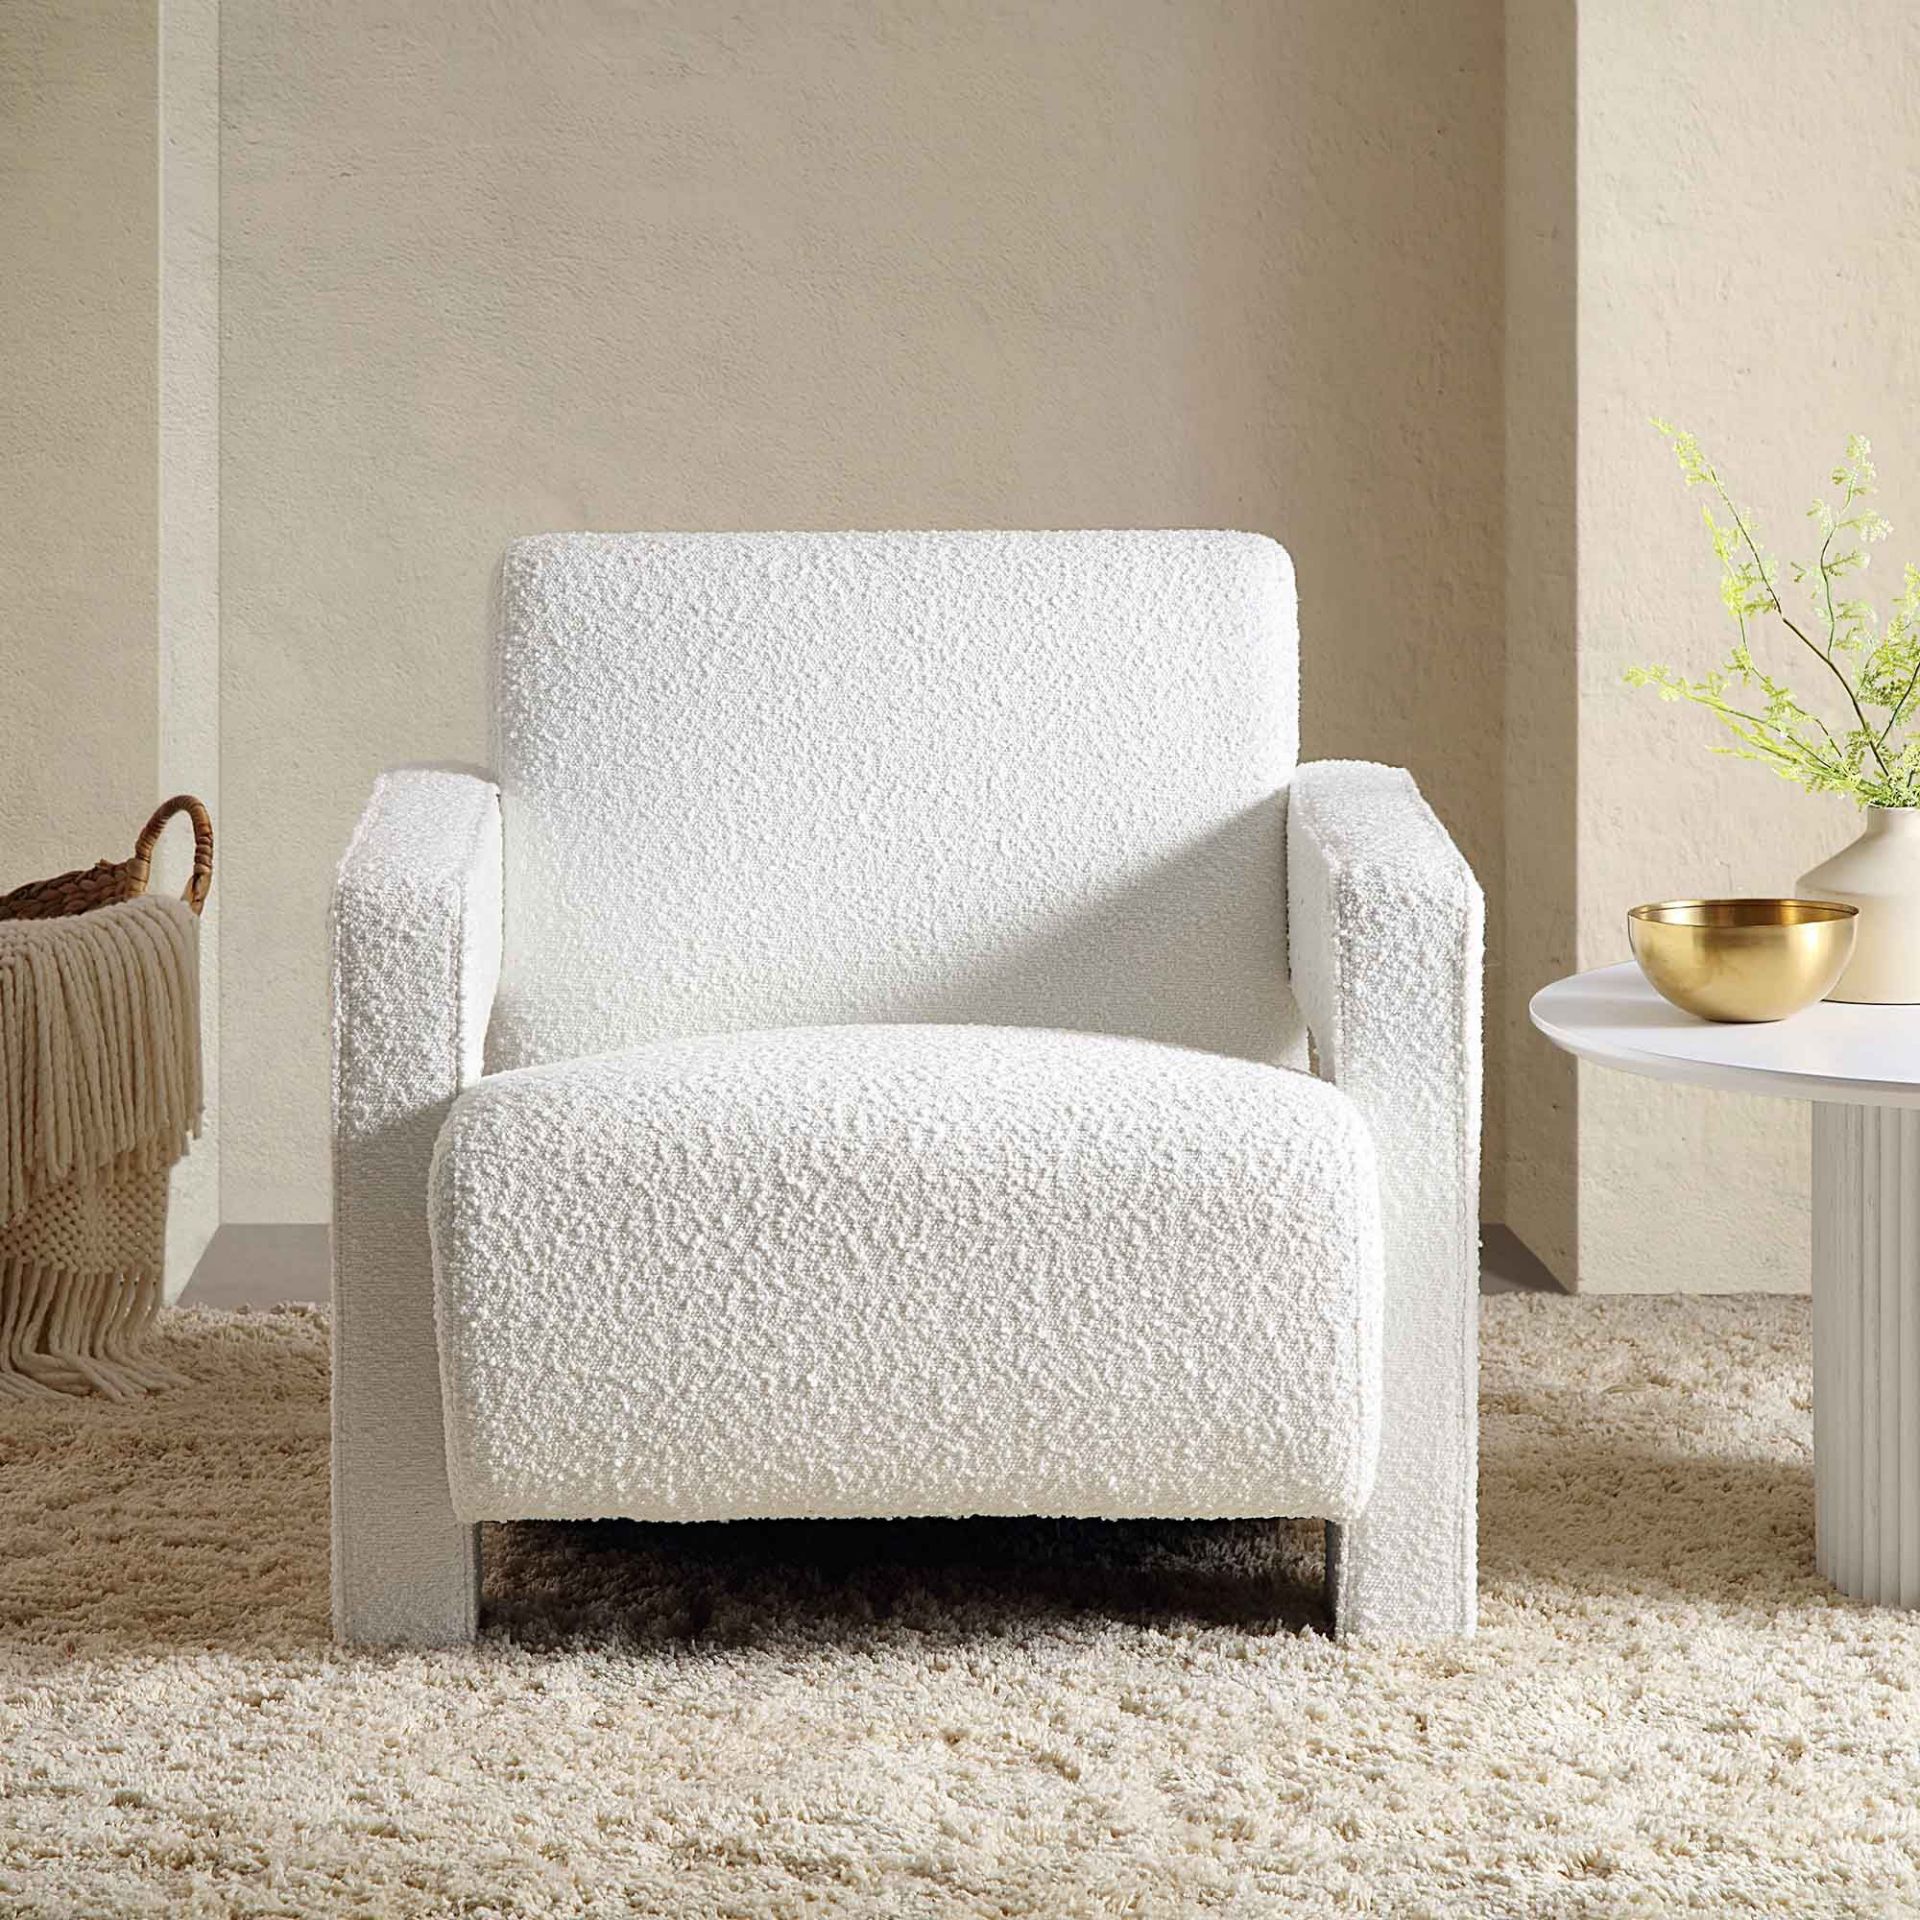 Brompton Sculptural Armchair, White Boucle. - R19.6. RRP £349.99. The chair is upholstered with